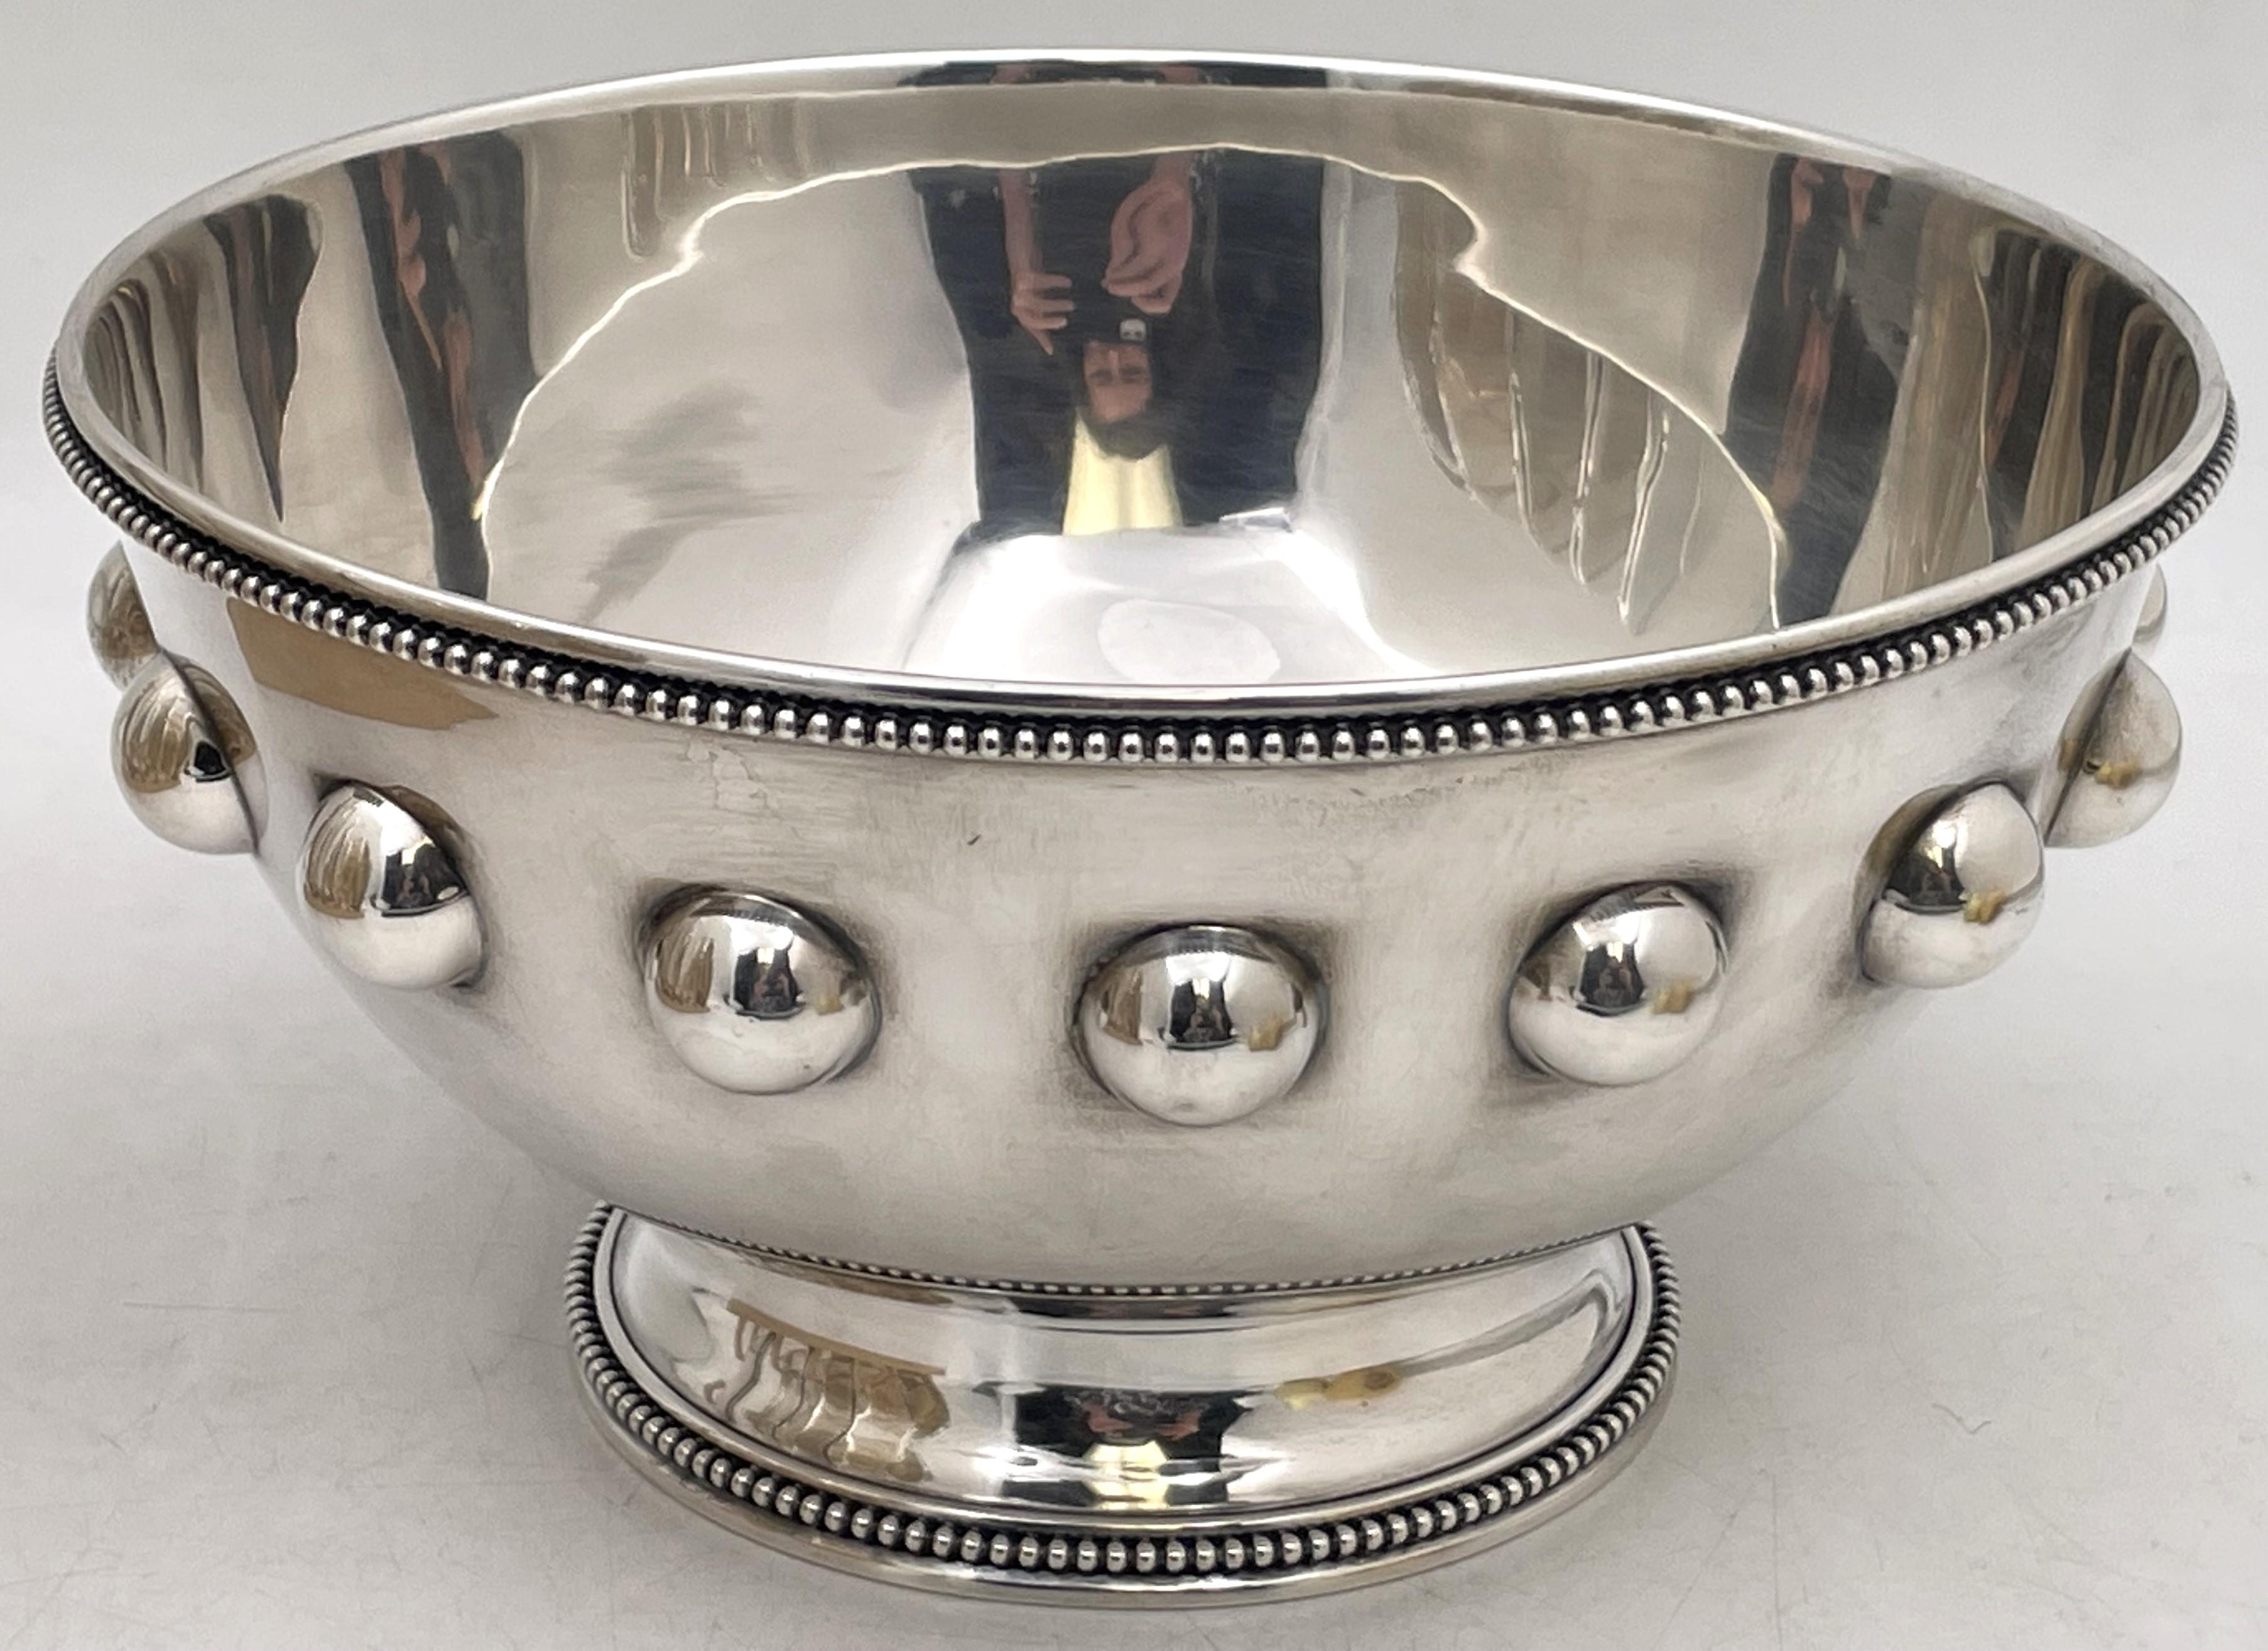 Shreve & Co. sterling silver bowl with raised circular motifs and with beaded rims, all in Mid-Century Modern style with an elegant, geometric design. It measures 9'' in diameter by 4 3/4'' in height, weighs 28.7 troy ounces, and bears hallmarks as